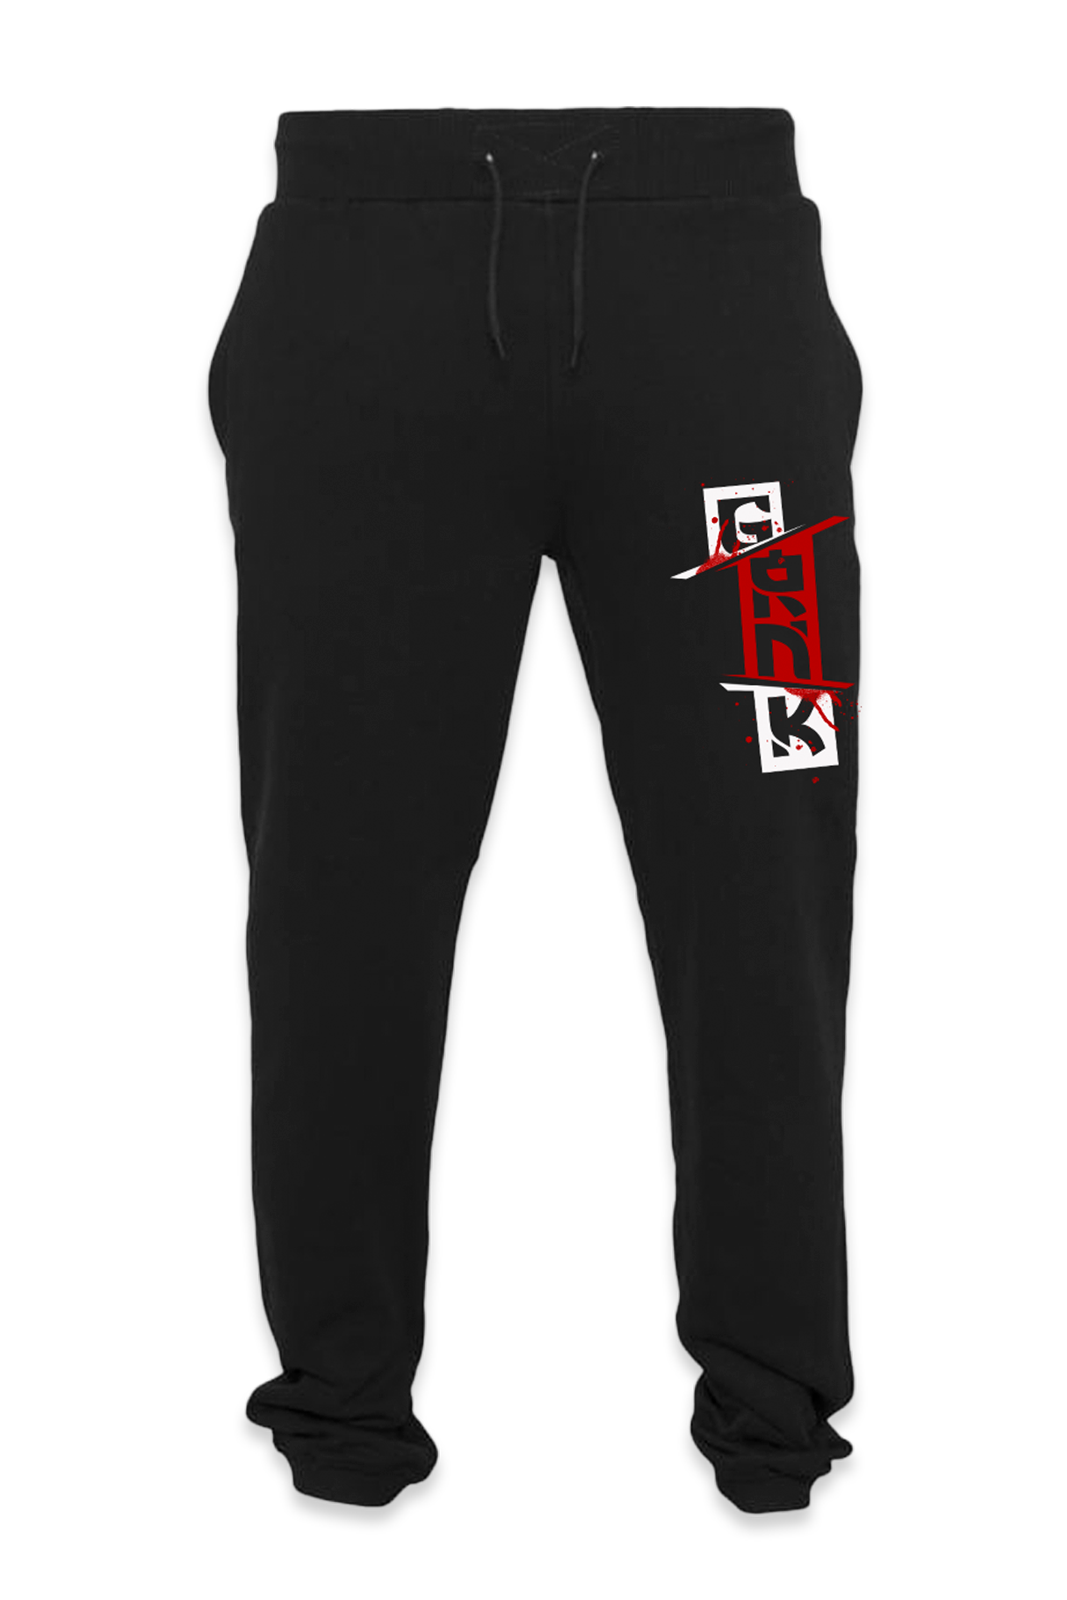 Sweat Pants - Gronkh Collection 3 - Japan Edition